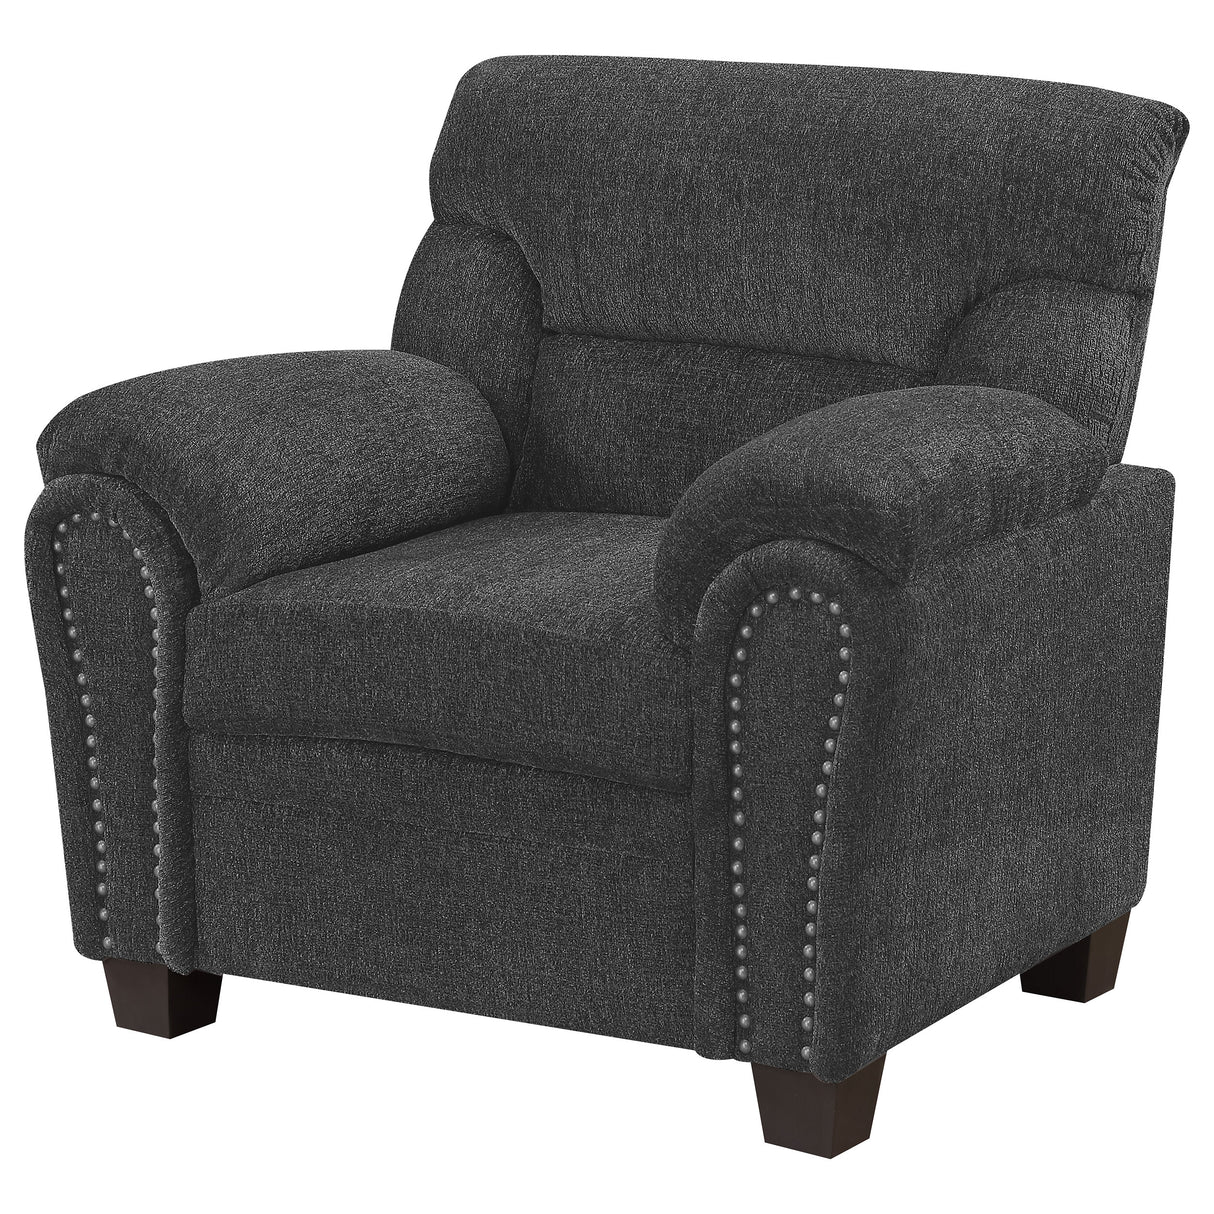 Chair - Clementine Upholstered Chair with Nailhead Trim Grey